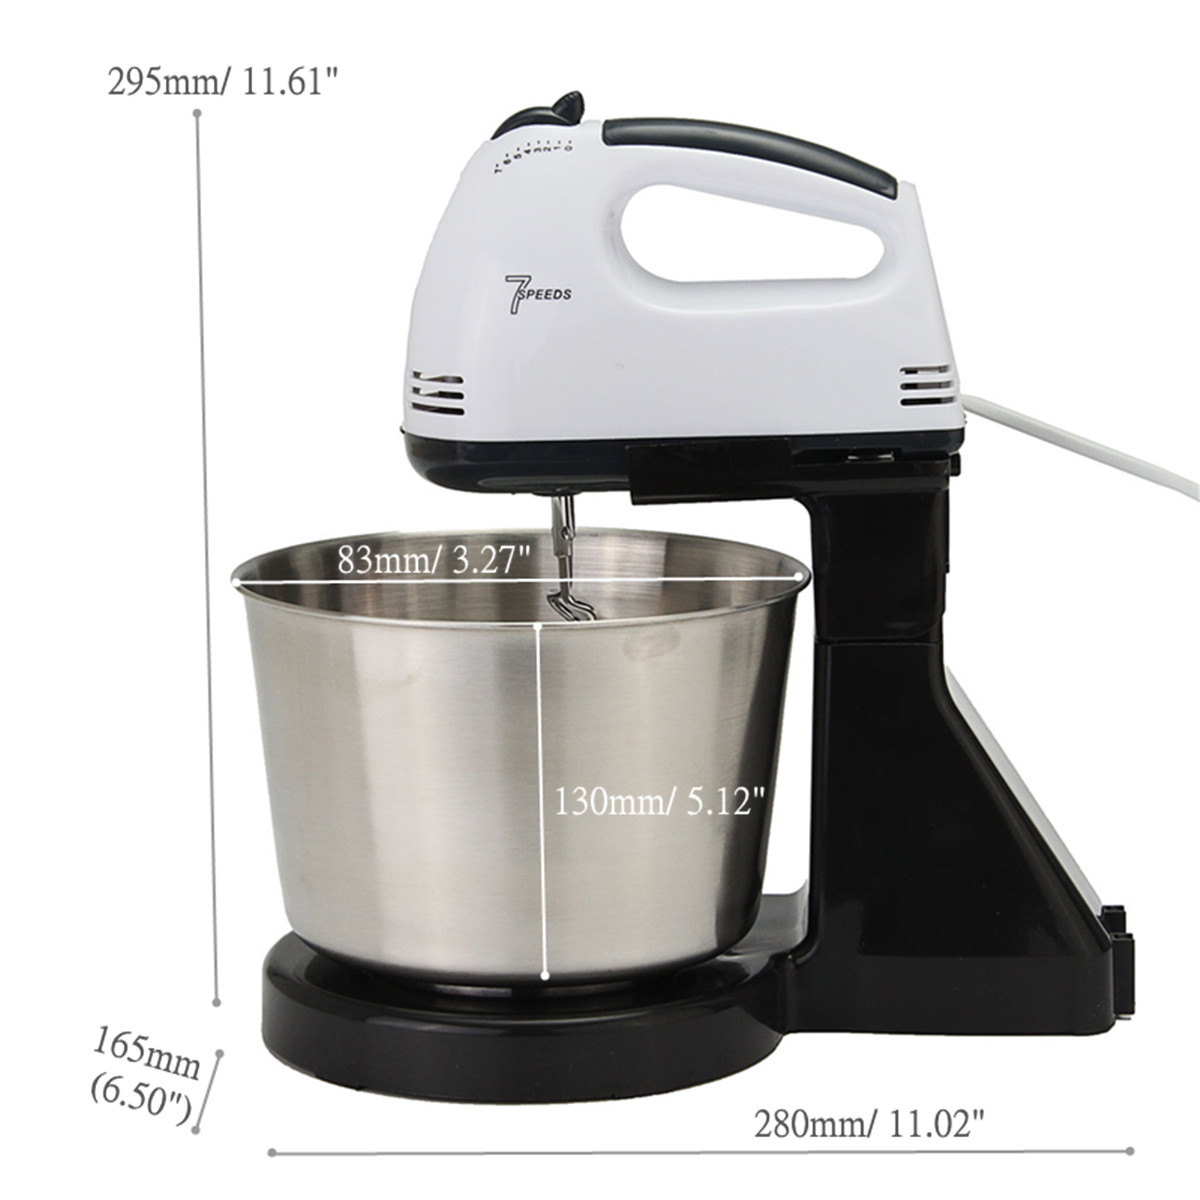 7 Speed Electric Egg Beater Dough Cakes Bread Egg Stand Mixer + Hand Blender + Bowl Food Mixer Kitchen Accessories Egg Tools 24